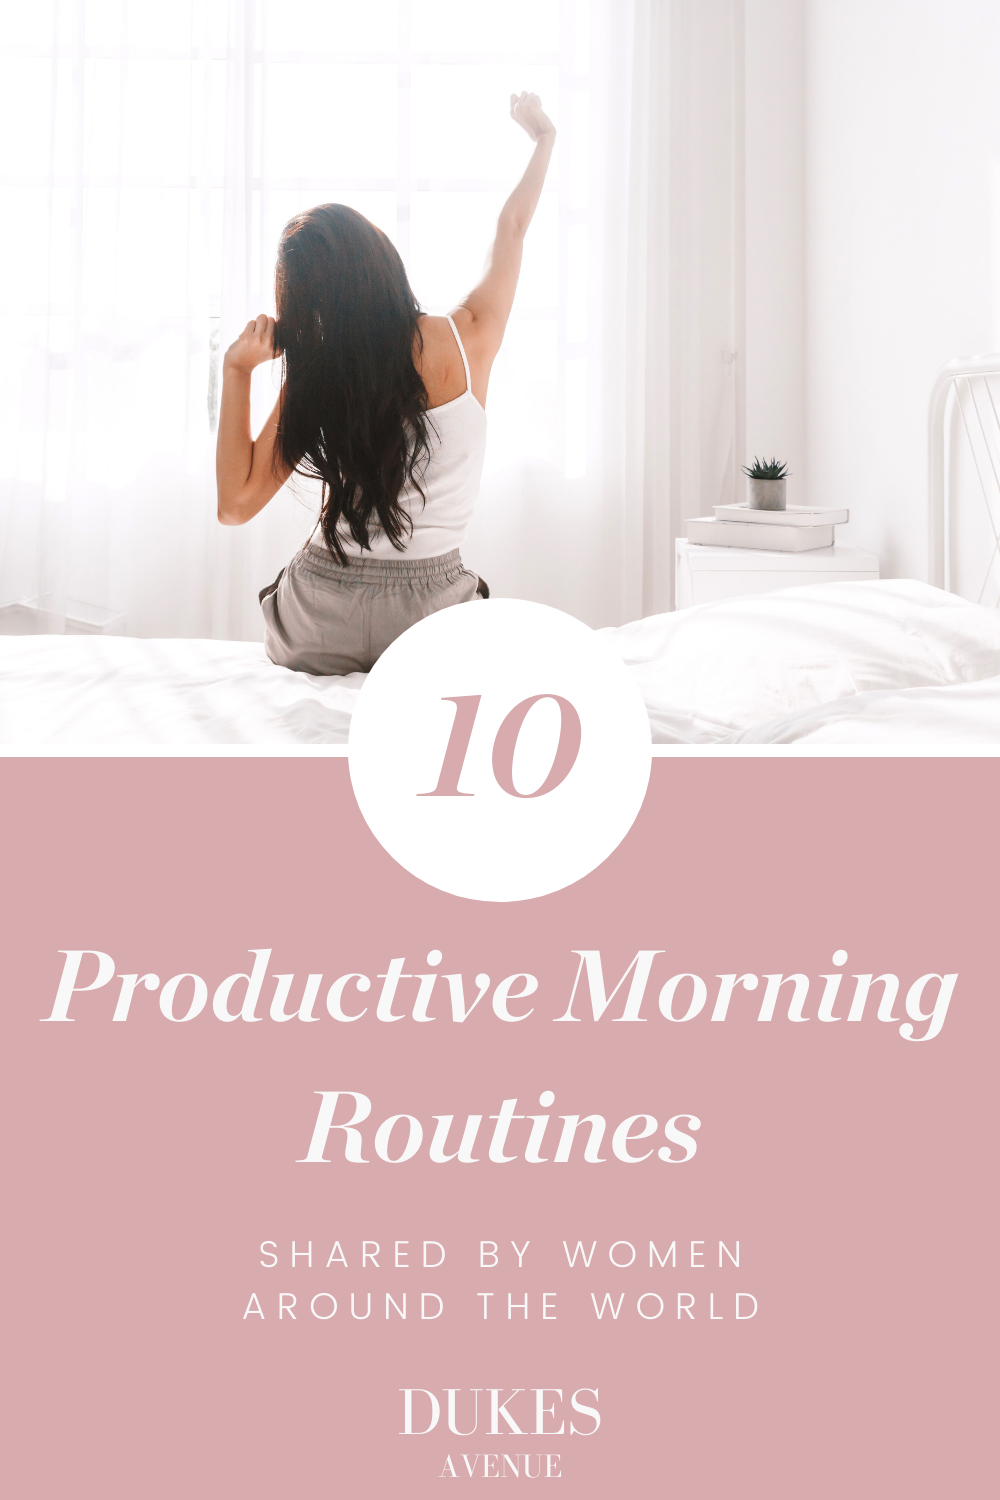 Woman stretching with text overlay stating '10 Productive Morning Routines Shared by Women Around the World'